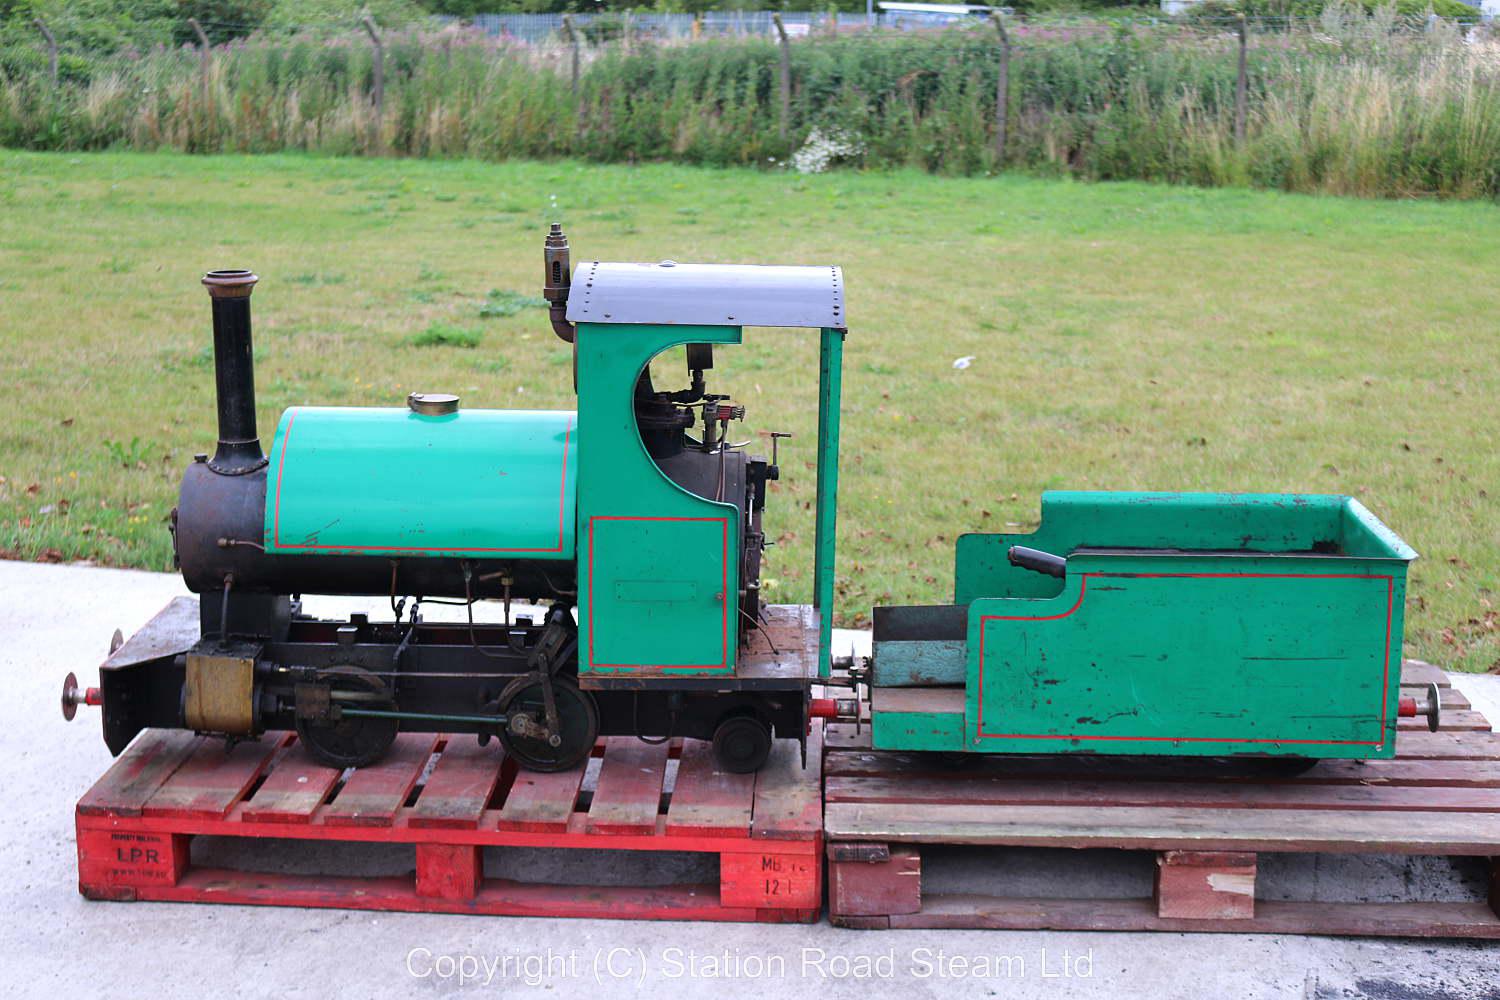 7 1/4 inch gauge "Sweet William" with ride on tender